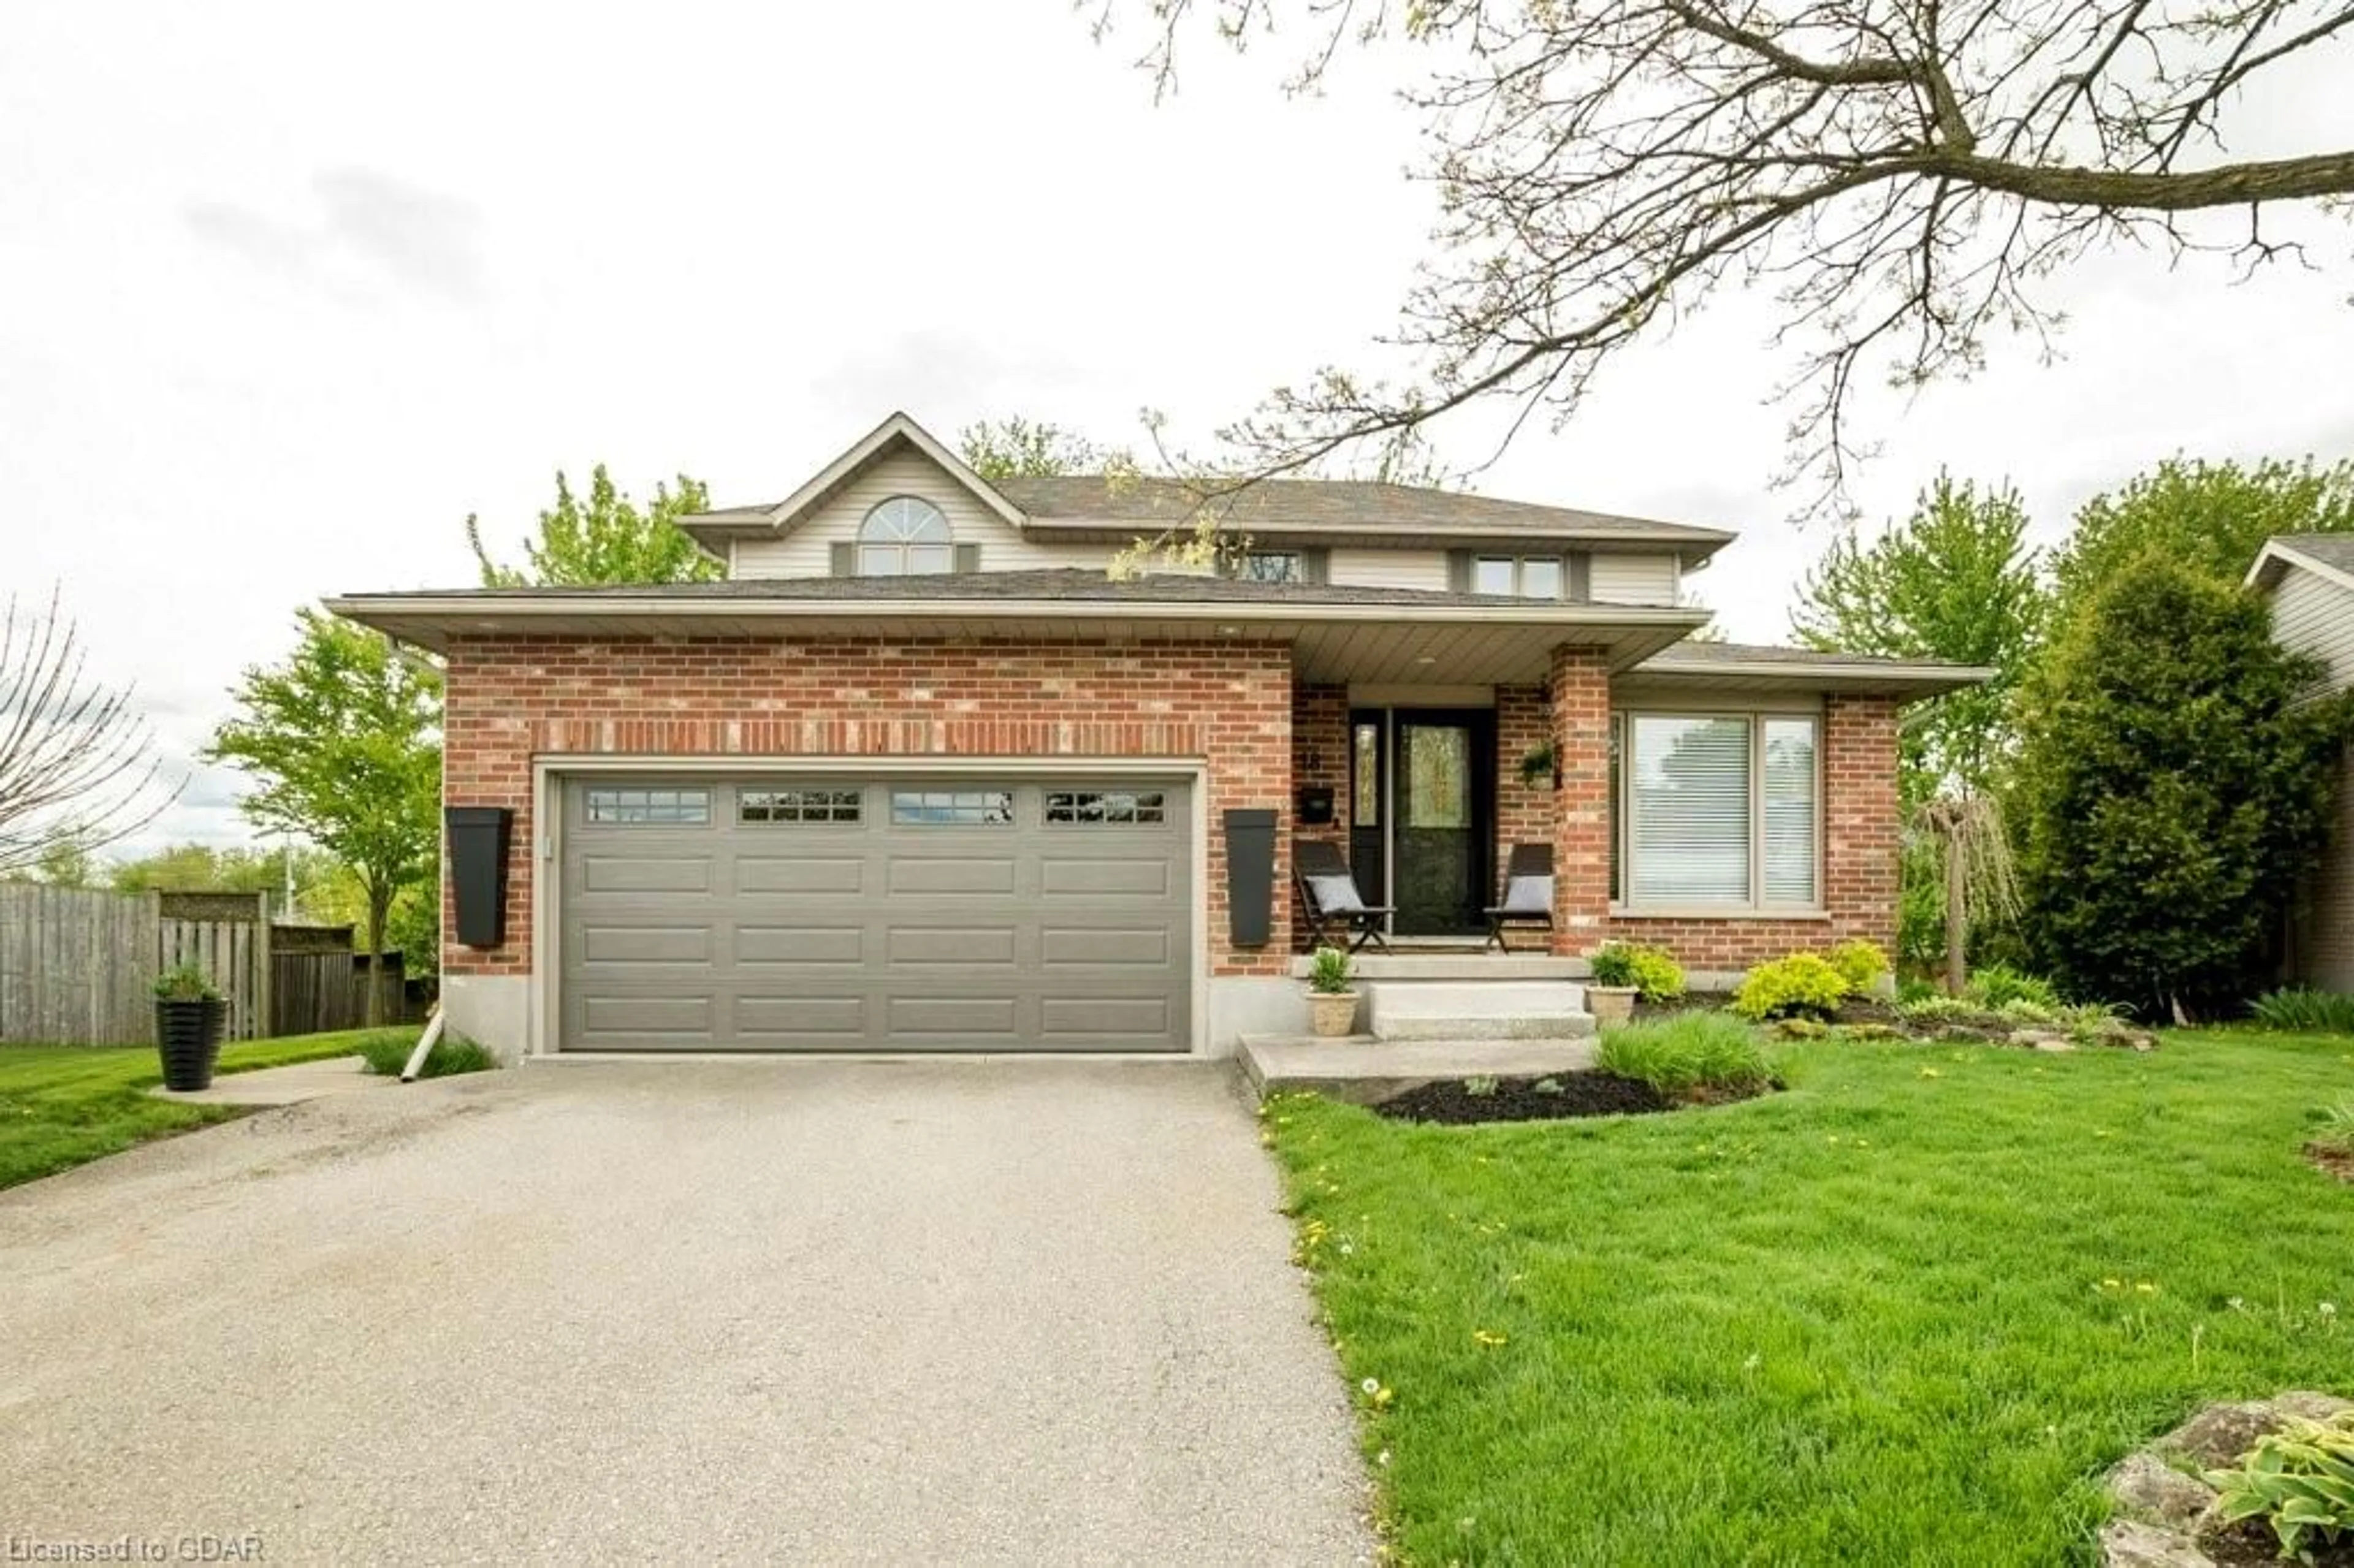 Home with brick exterior material for 18 Mclachlan Pl, Guelph Ontario N1H 8K3